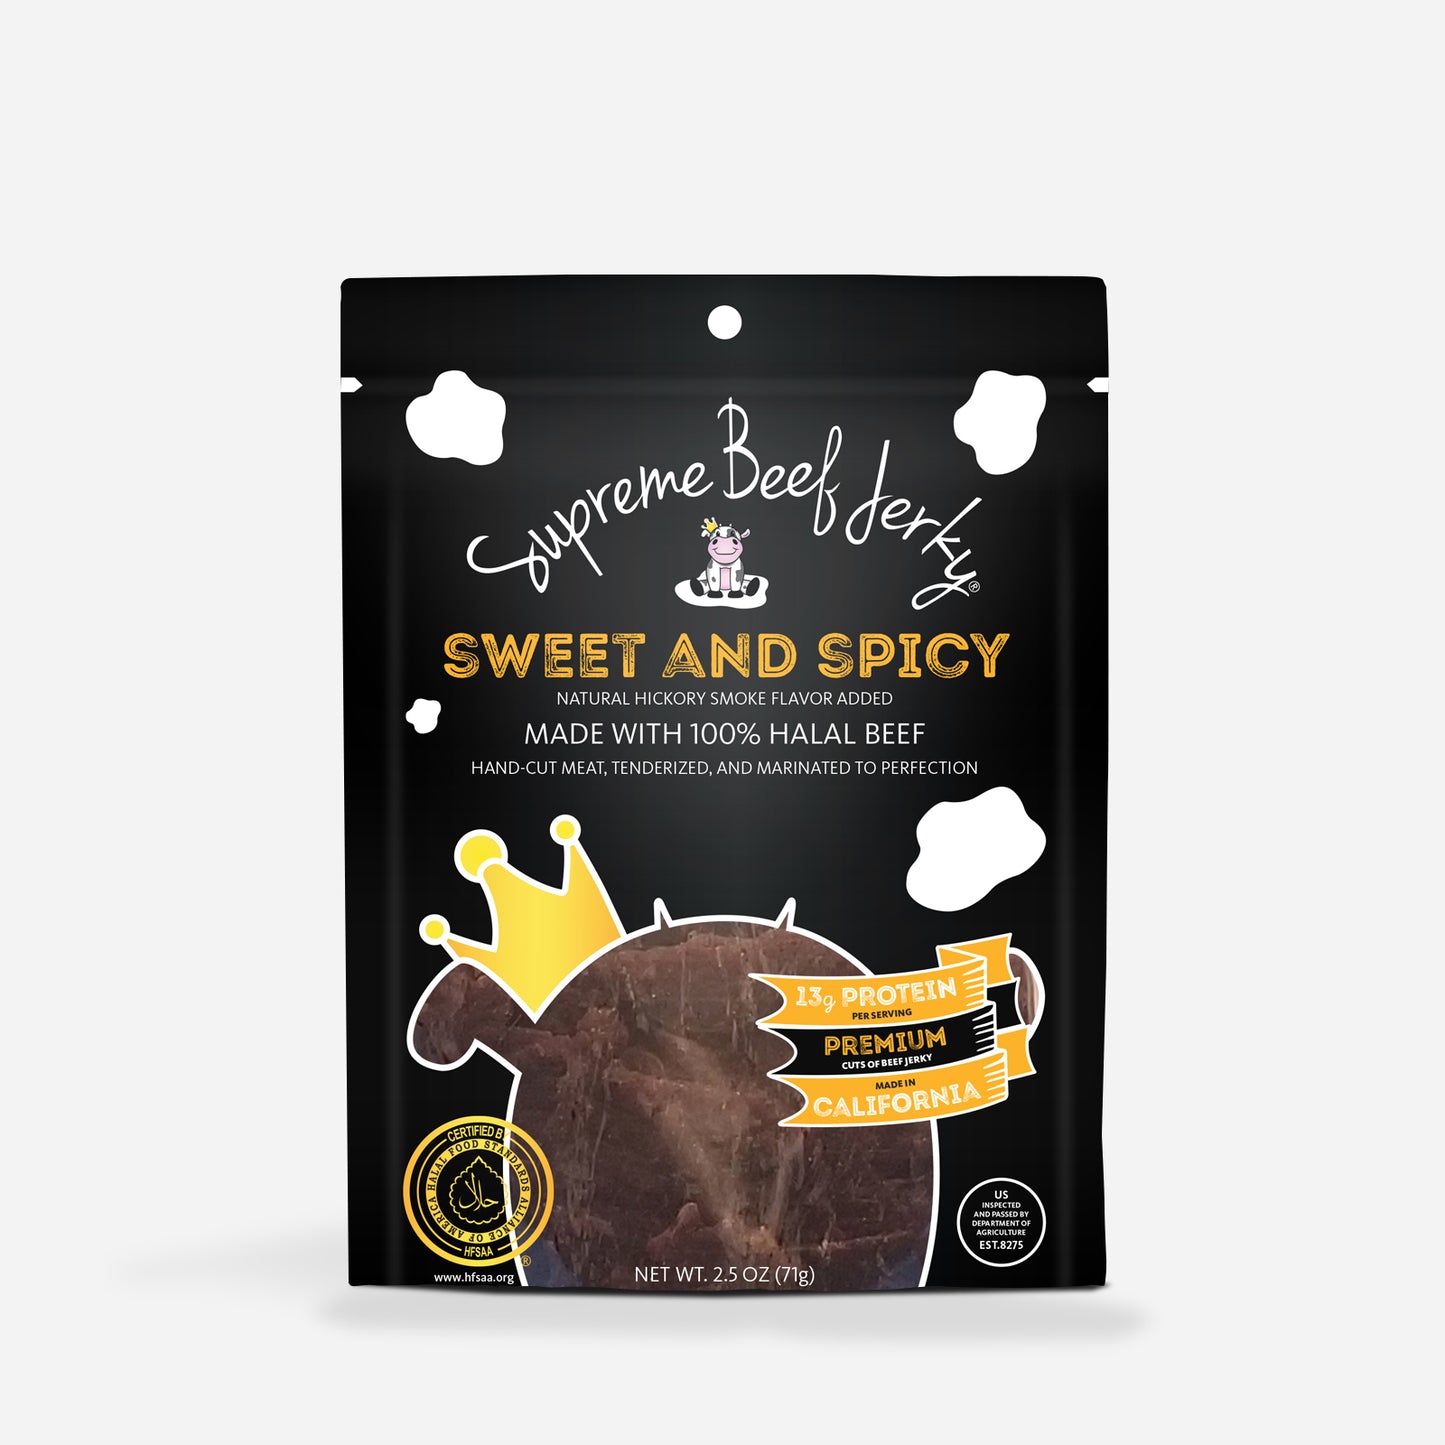 10-PACK, 2.5 OZ BAG, HALAL BEEF JERKY, MARINATED SWEET AND SPICY BEEF JERKY, HANDCRAFTED GOURMET MEAT SNACKS (SWEET AND SPICY)